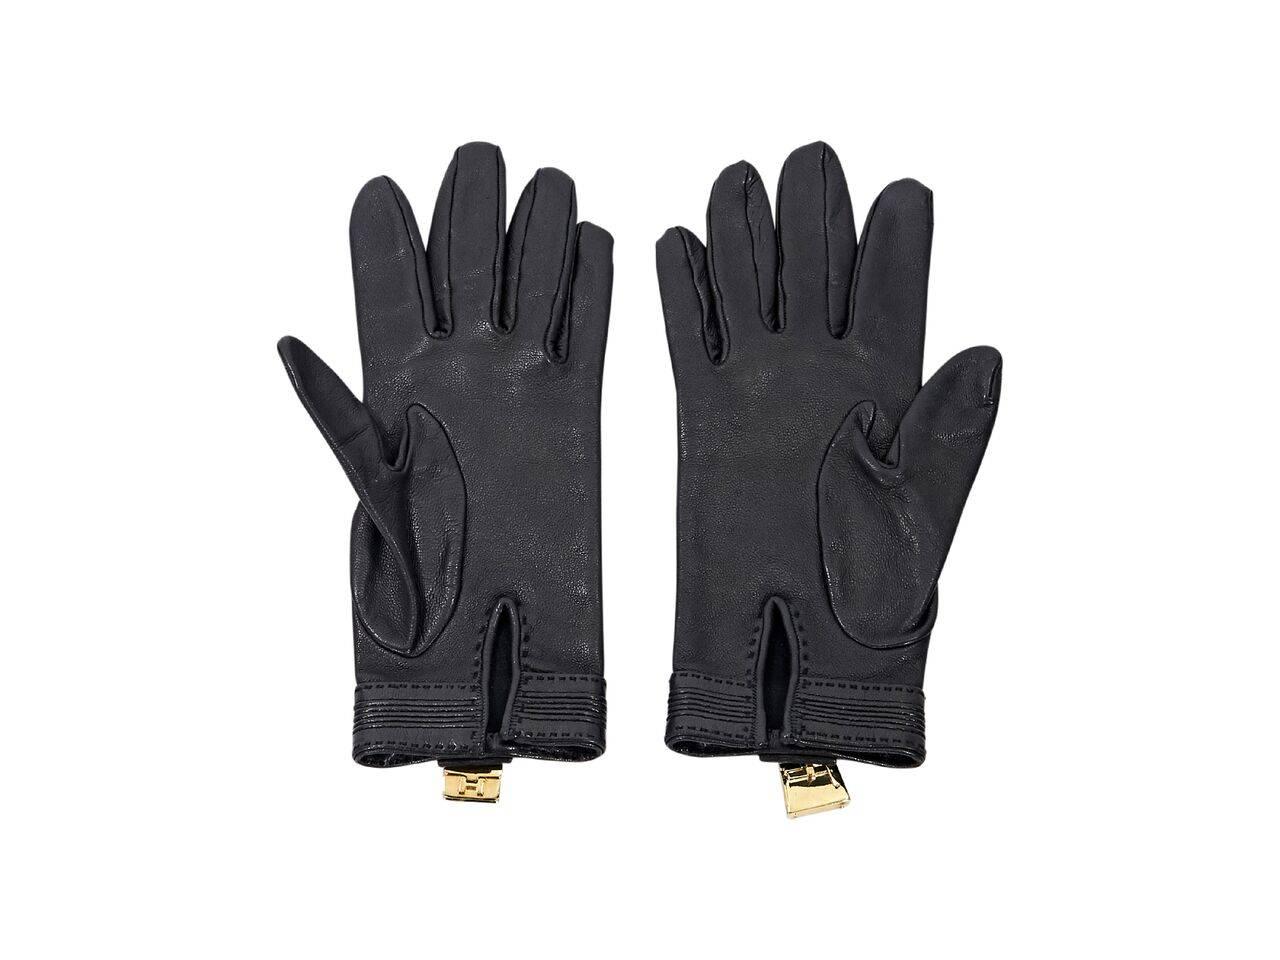 Product details:  Black lambskin leather Soya gloves by Hermes.  Accented with a padlock charm.  Goldtone hardware.
Condition: Pre-owned. Very good.
Est. Retail $ 970.00